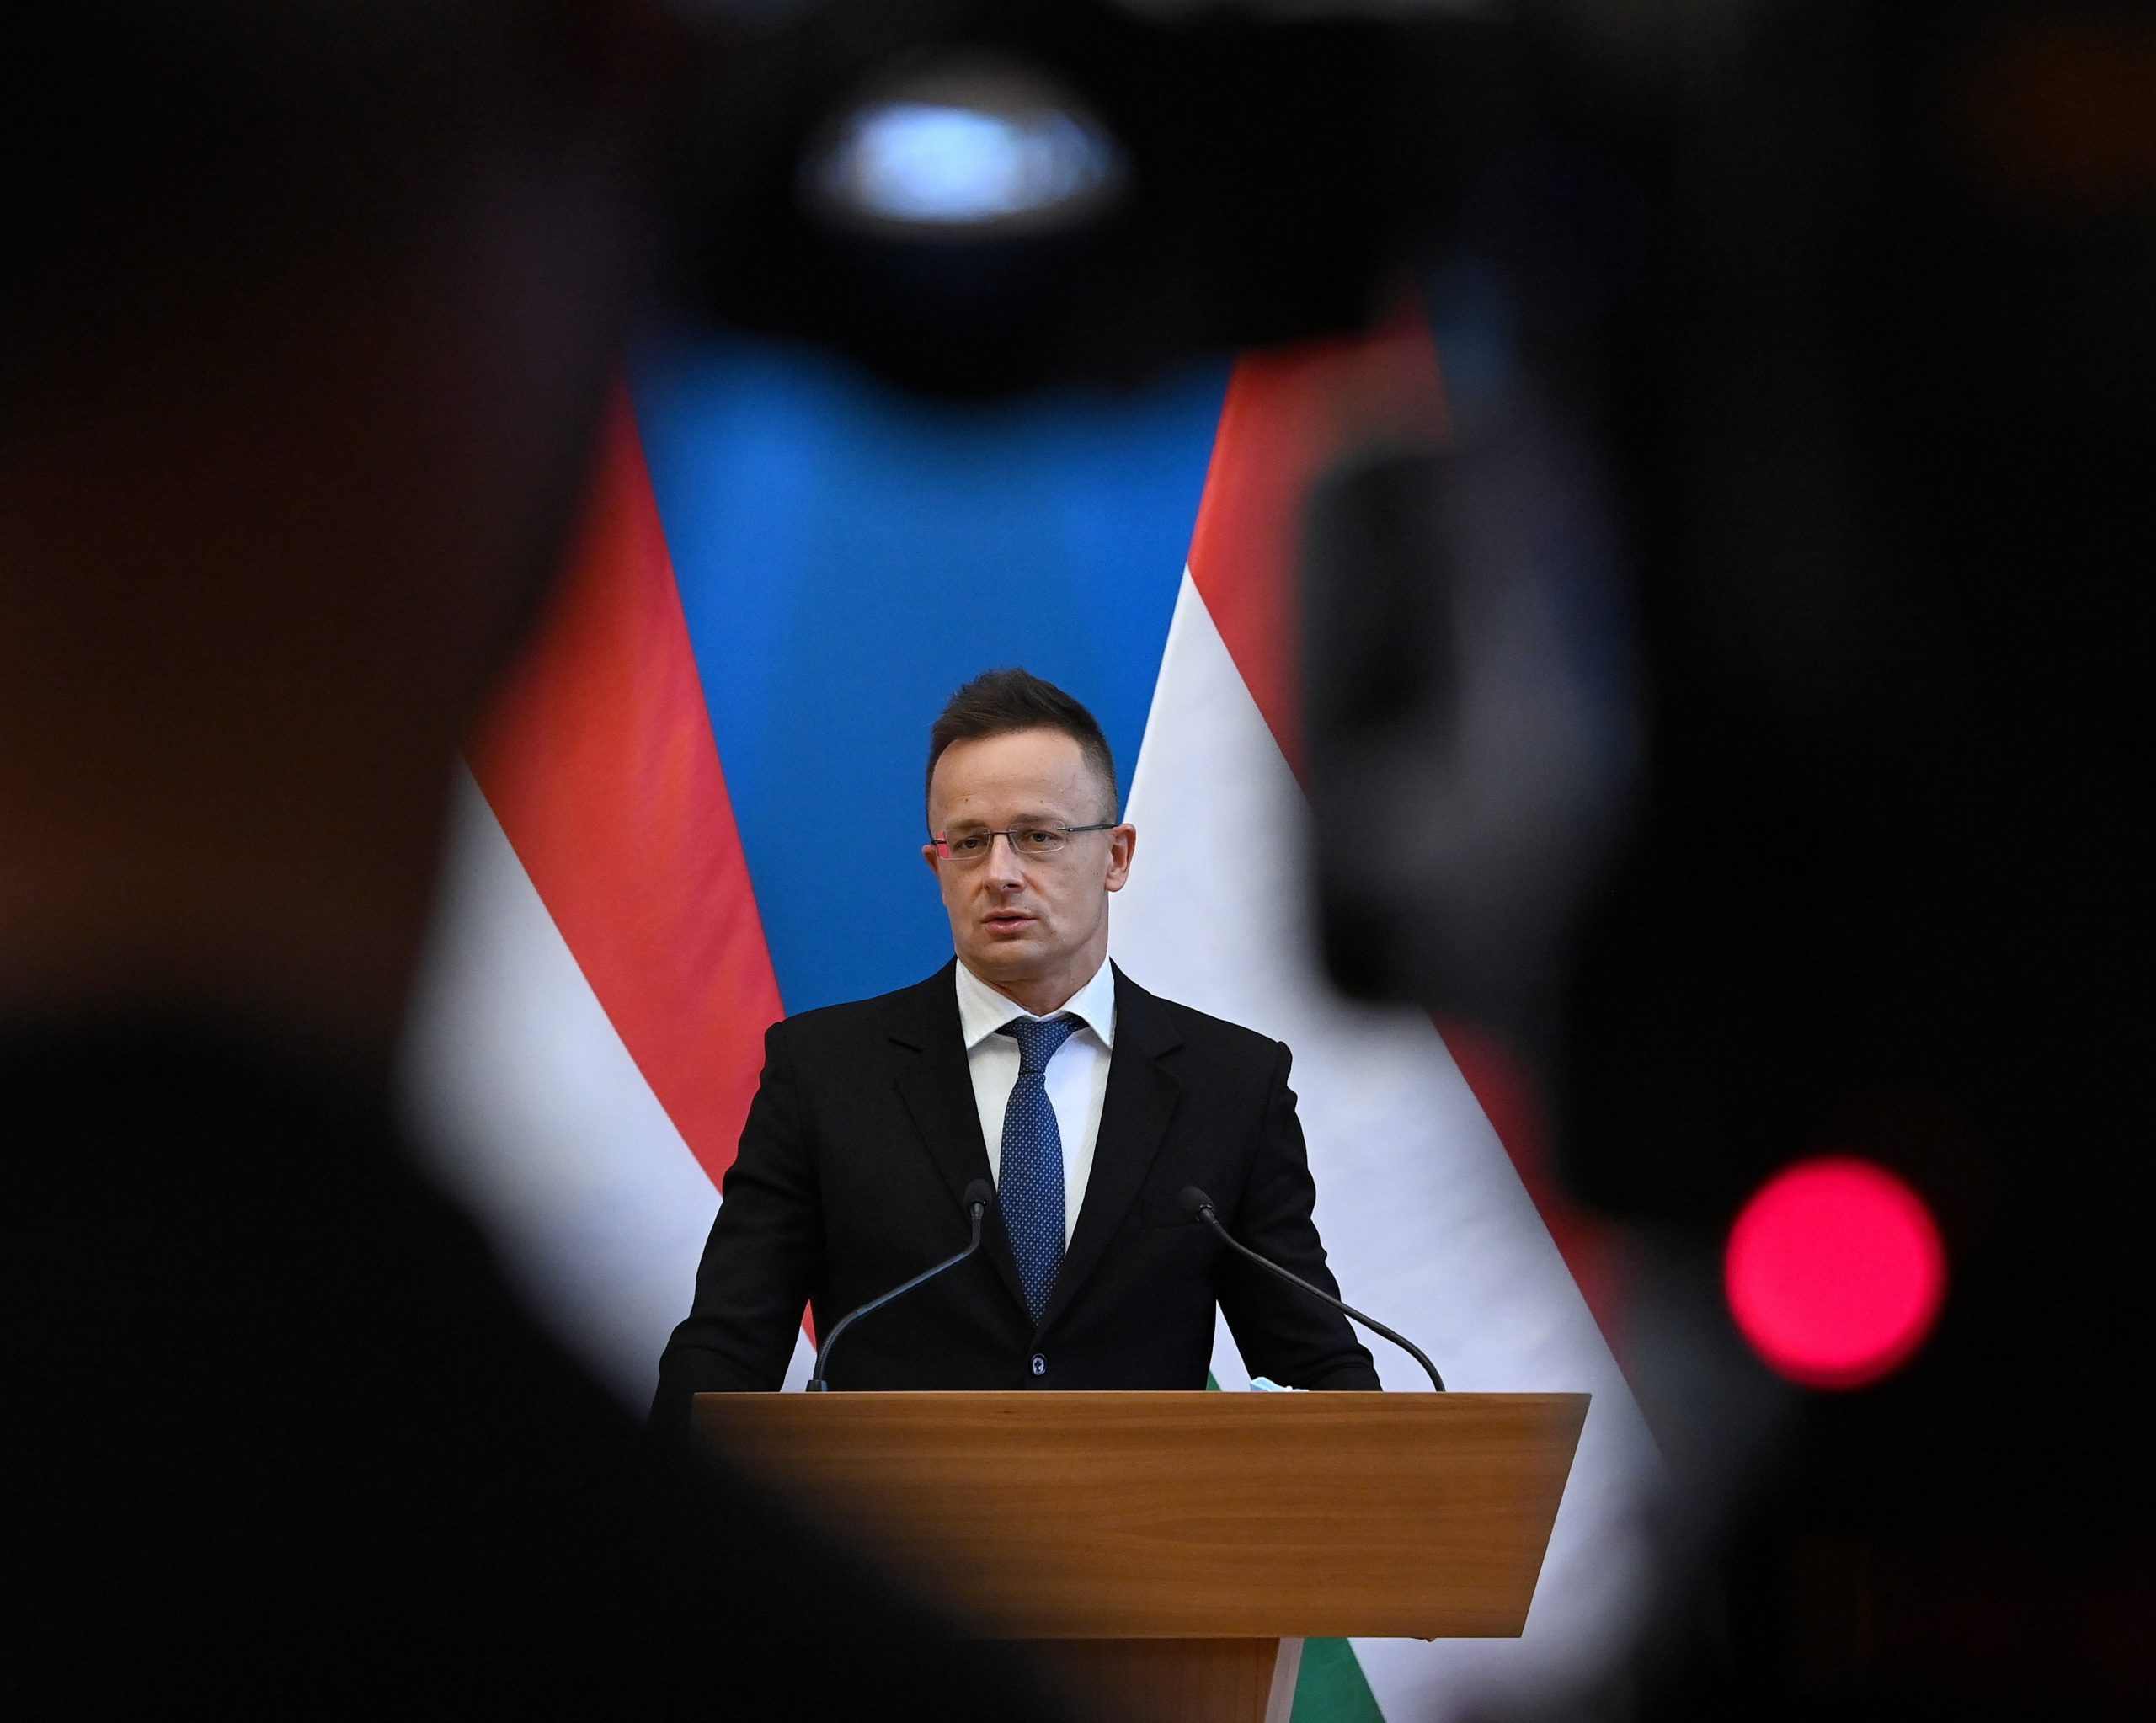 FM Szijjártó: Hungary-Russia Cooperation Based on Mutual Advantages and Respect